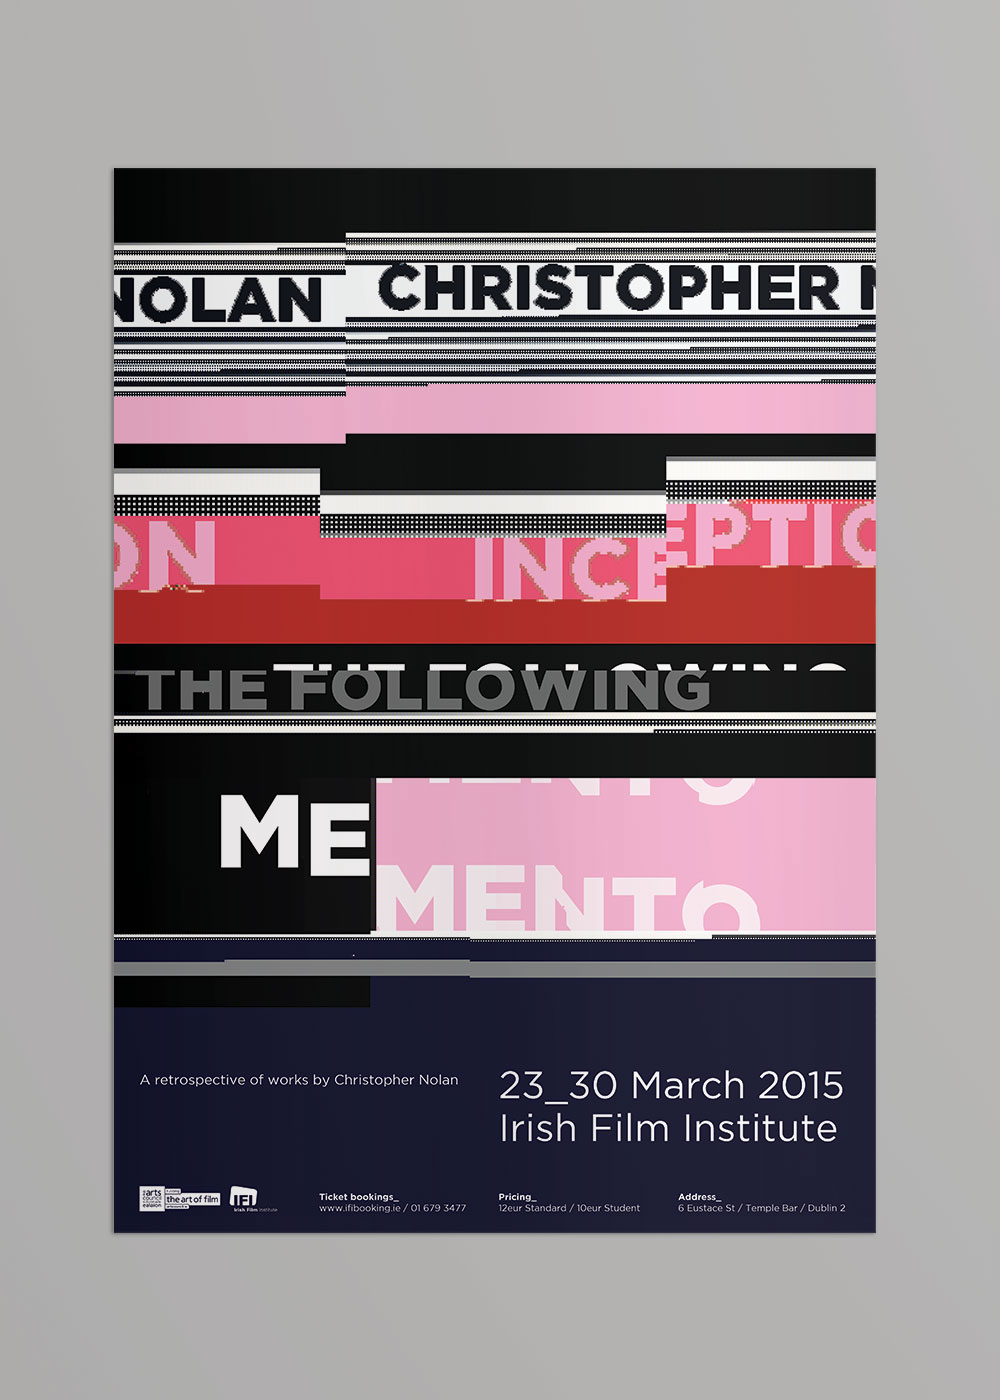 christopher nolan christopher nolan memento inception following motion gotham after effects Glitch D&AD monotype